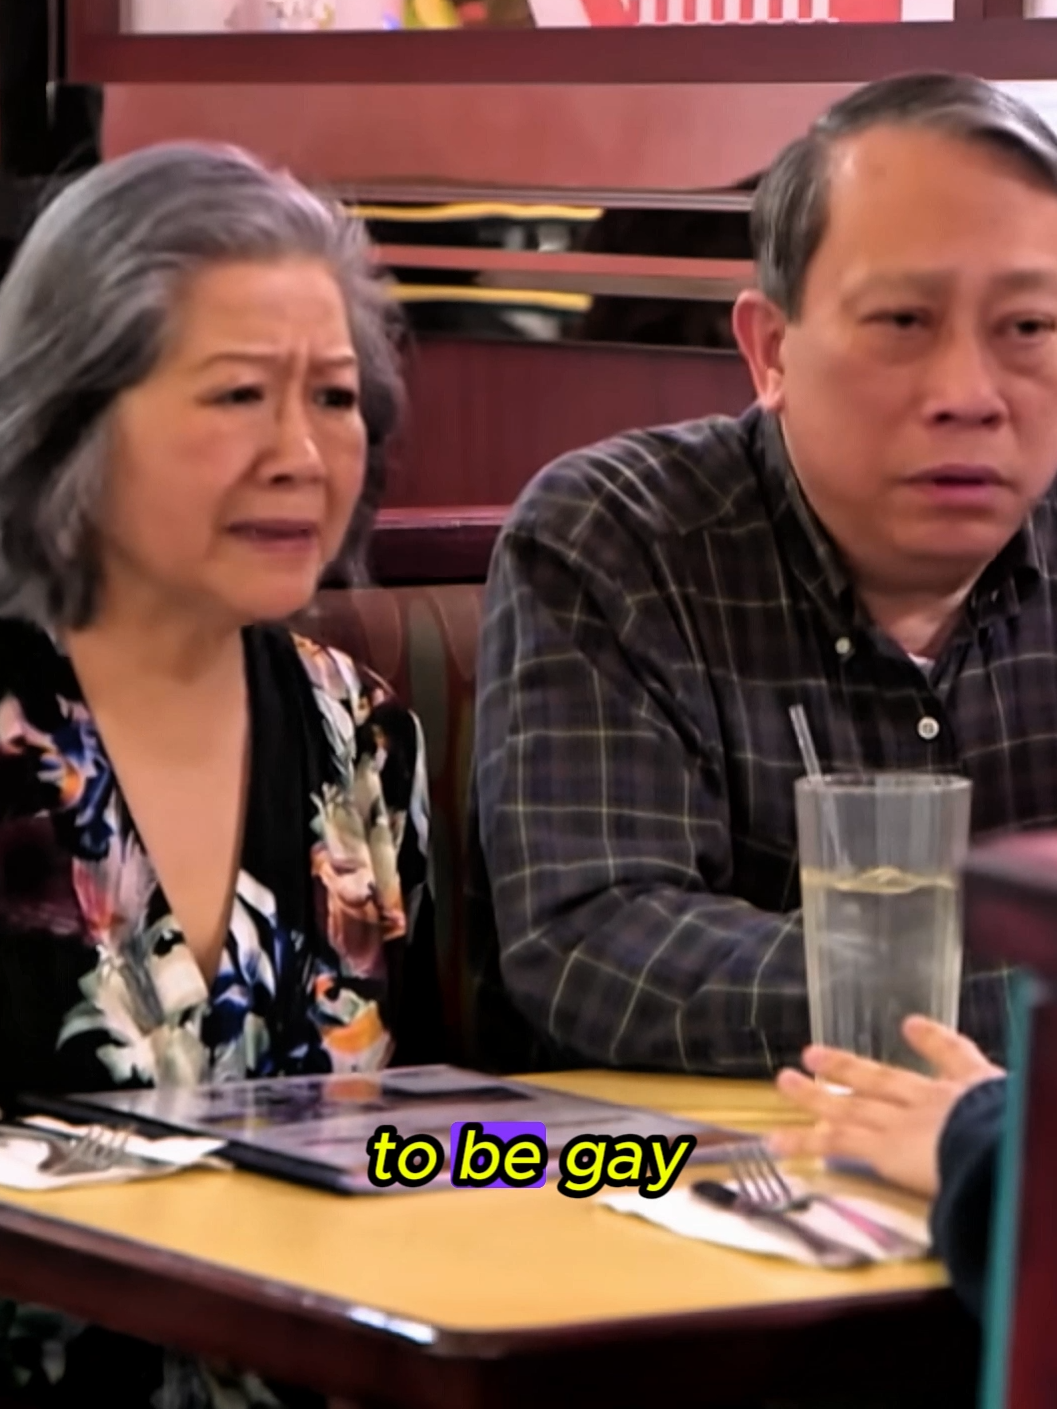 Young man comes out as gay to his traditional Asian parents #foryou #fyp #gay #respect #viral